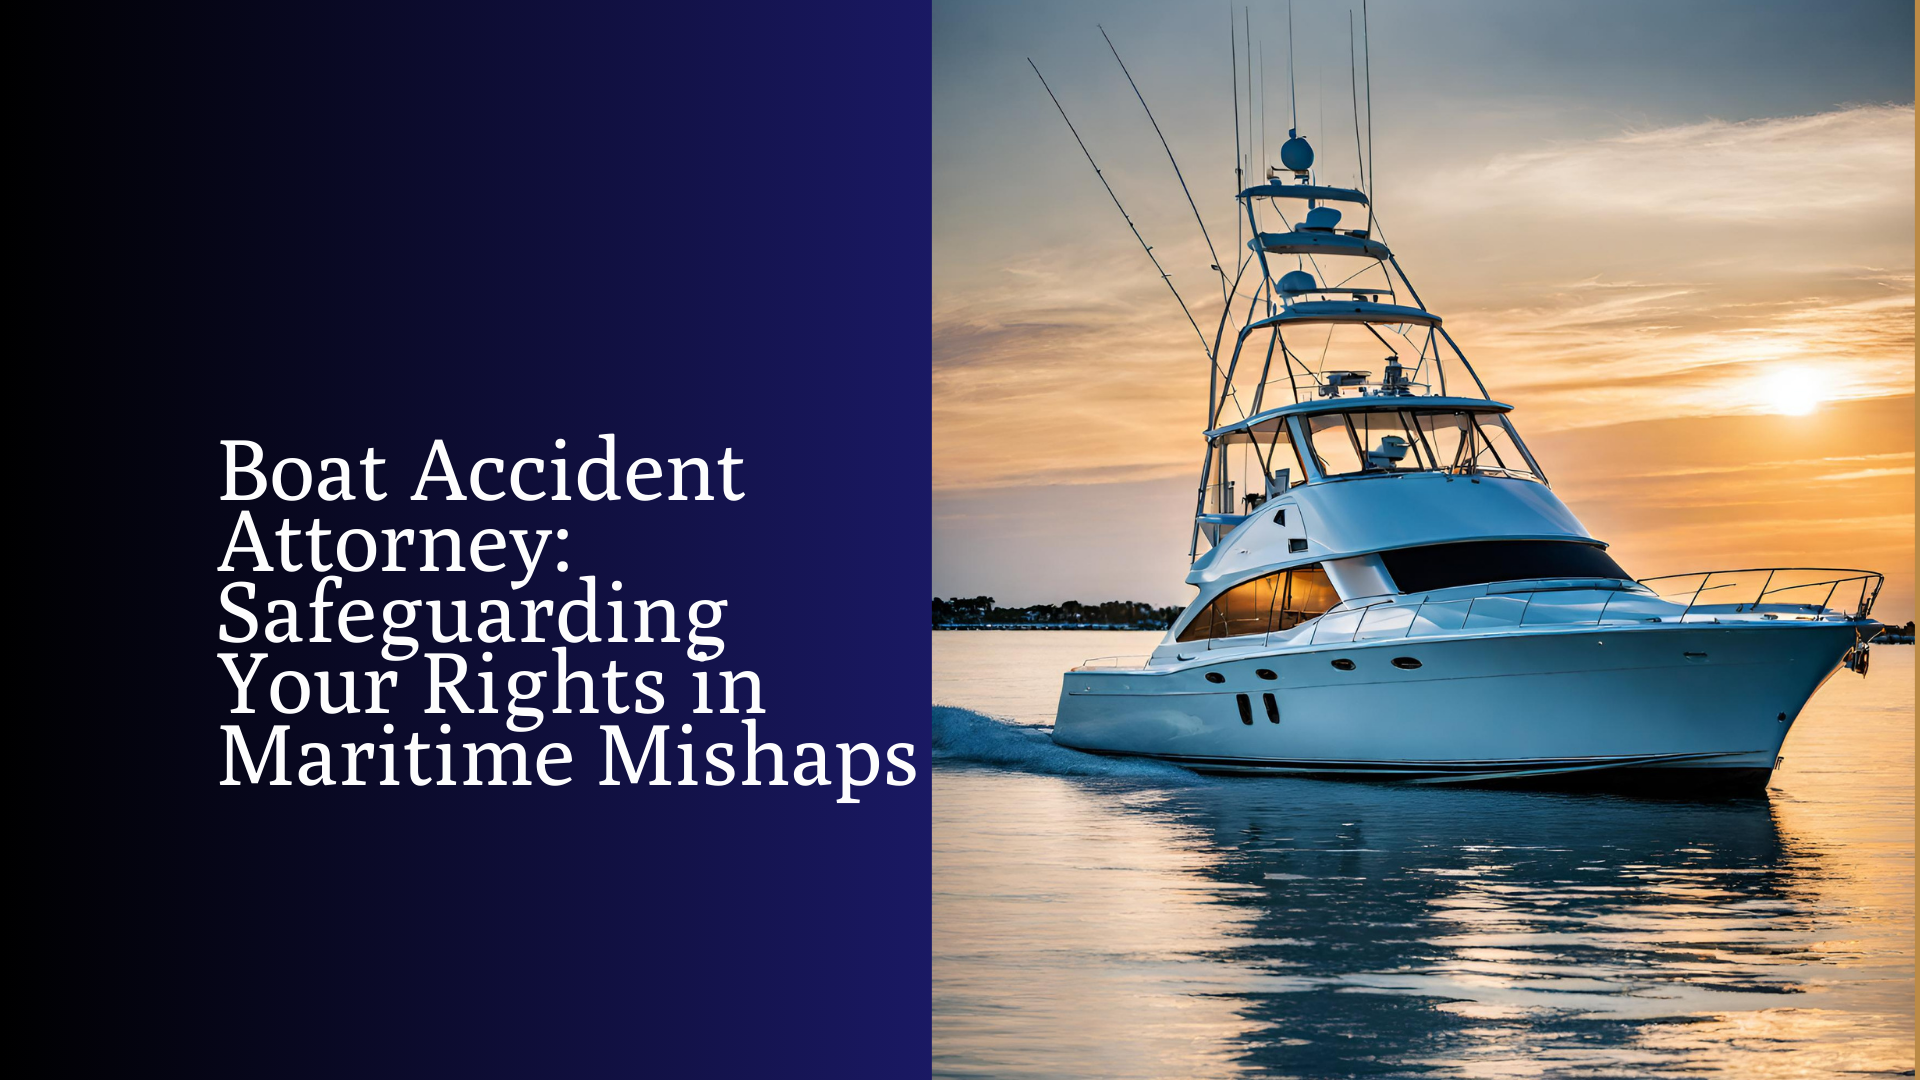 Safeguarding-Your-Rights-in-Maritime-Mishaps